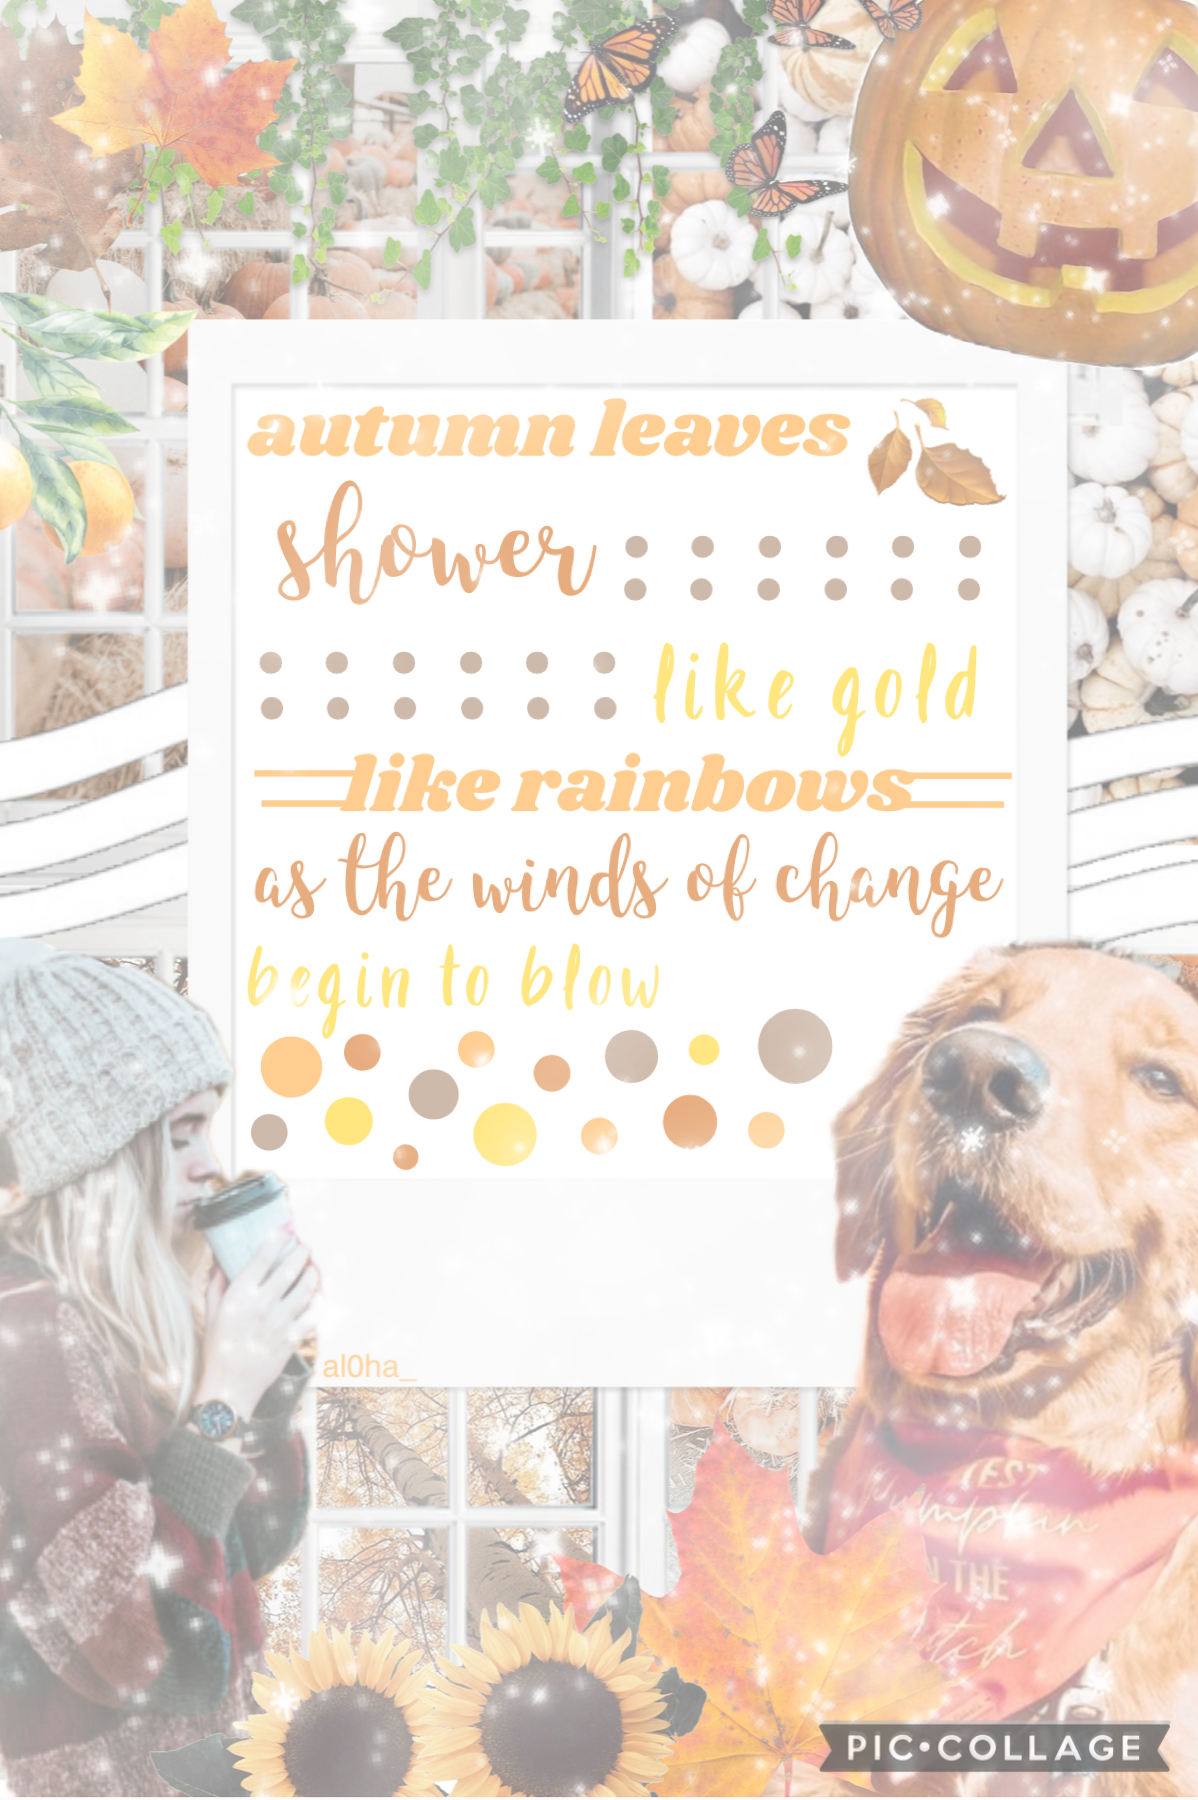 🍁10/21/22🍁 tap!
hi guys!! i've been taking a break from posting for awhile. but i couldn't stand not making a fall collage. idk how much i'll be posting now. qotd: how is everyone doing? 